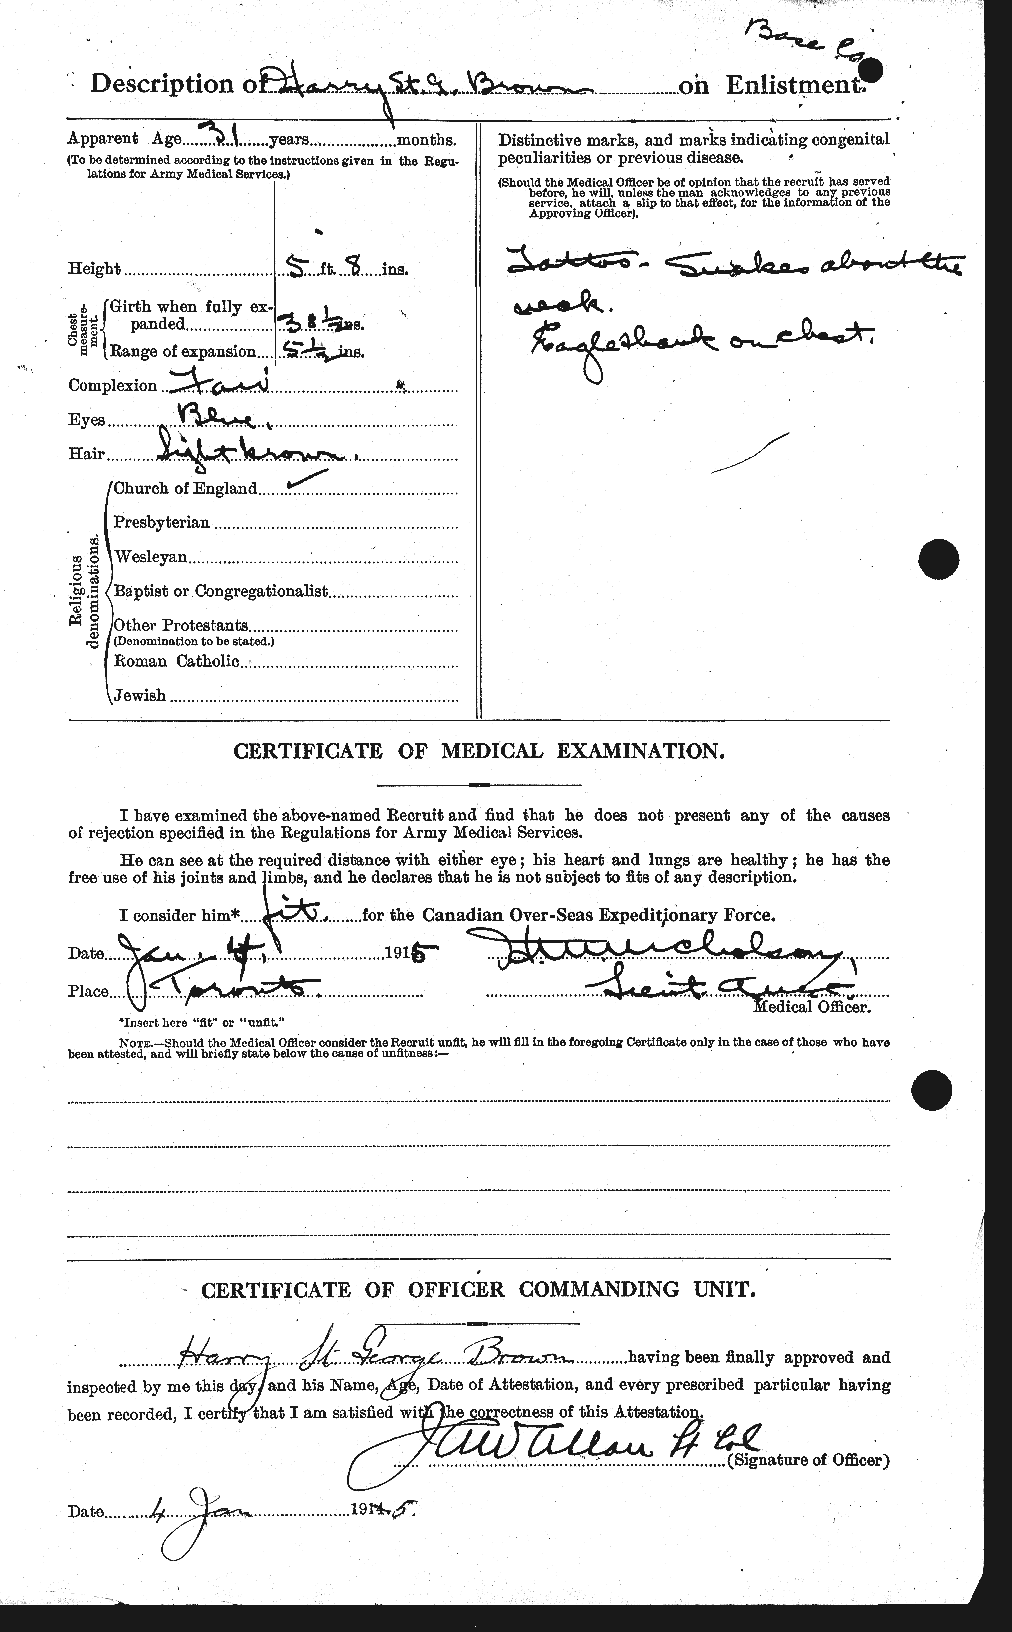 Personnel Records of the First World War - CEF 262662b